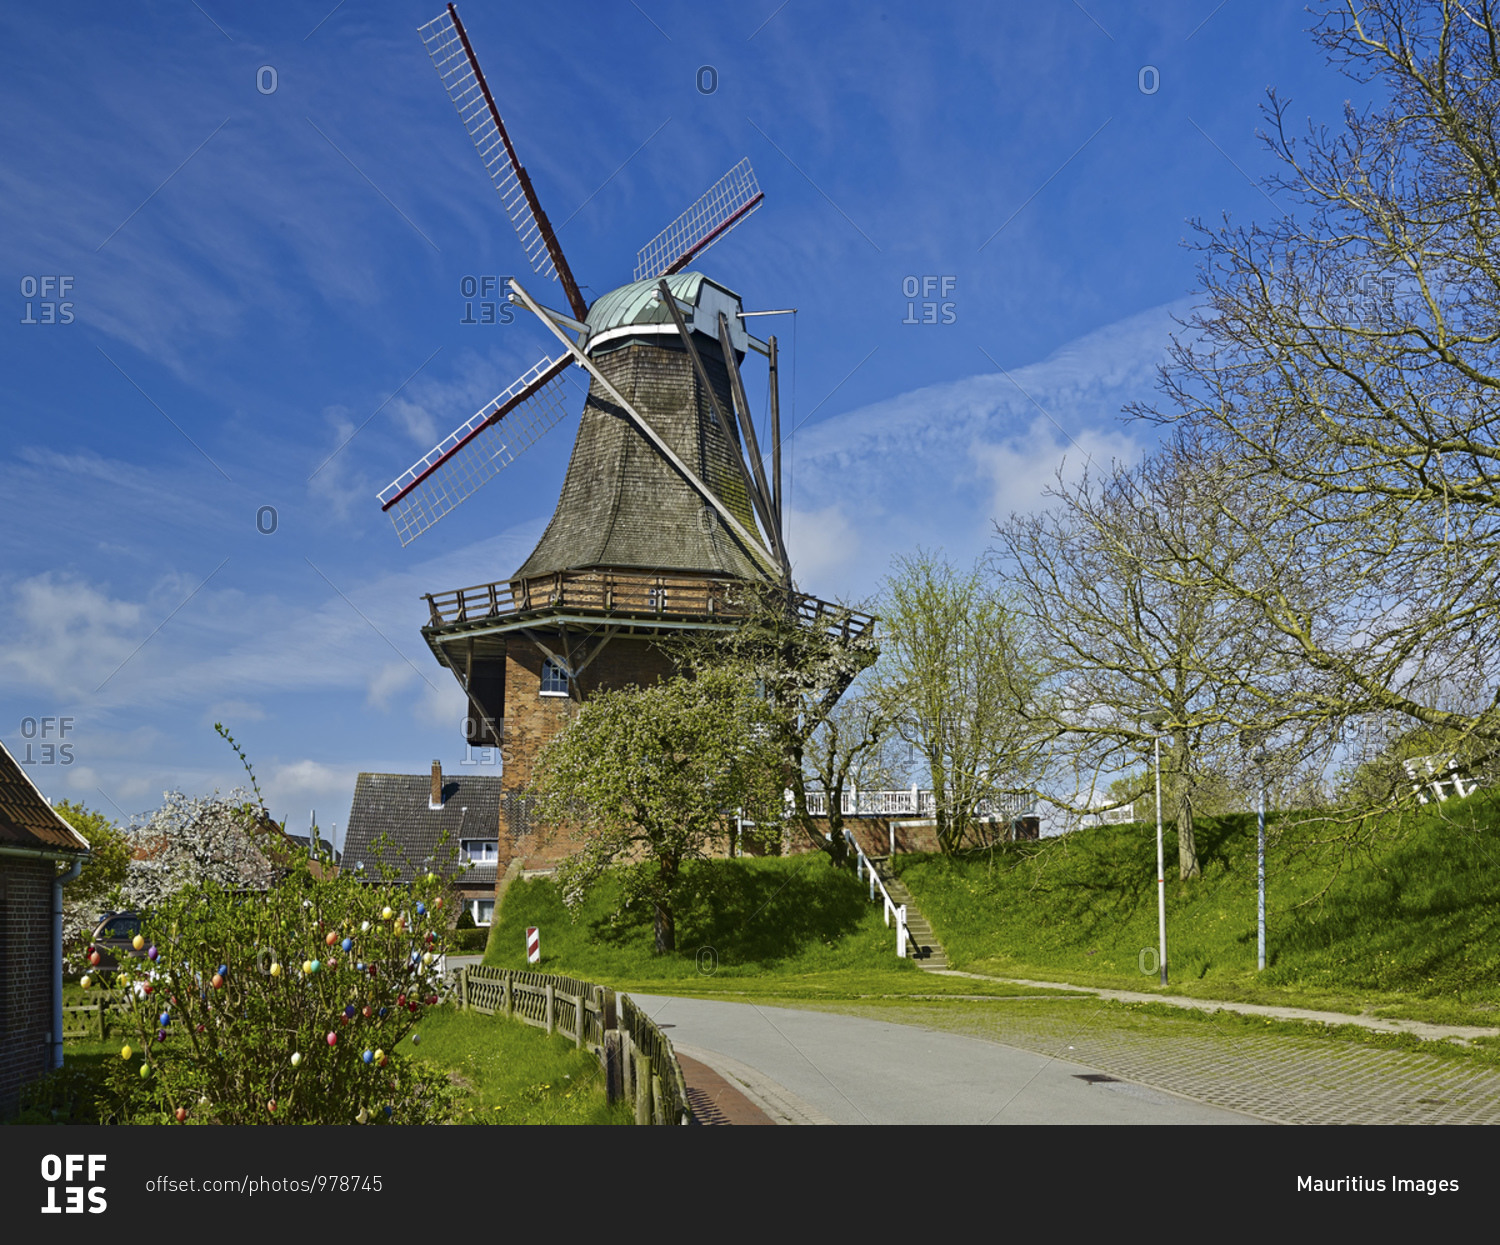 Mill Aurora with cherry blossom in Borstel, district of Jork, Altes Land, district of Stade, Lower Saxony, Germany, Europe